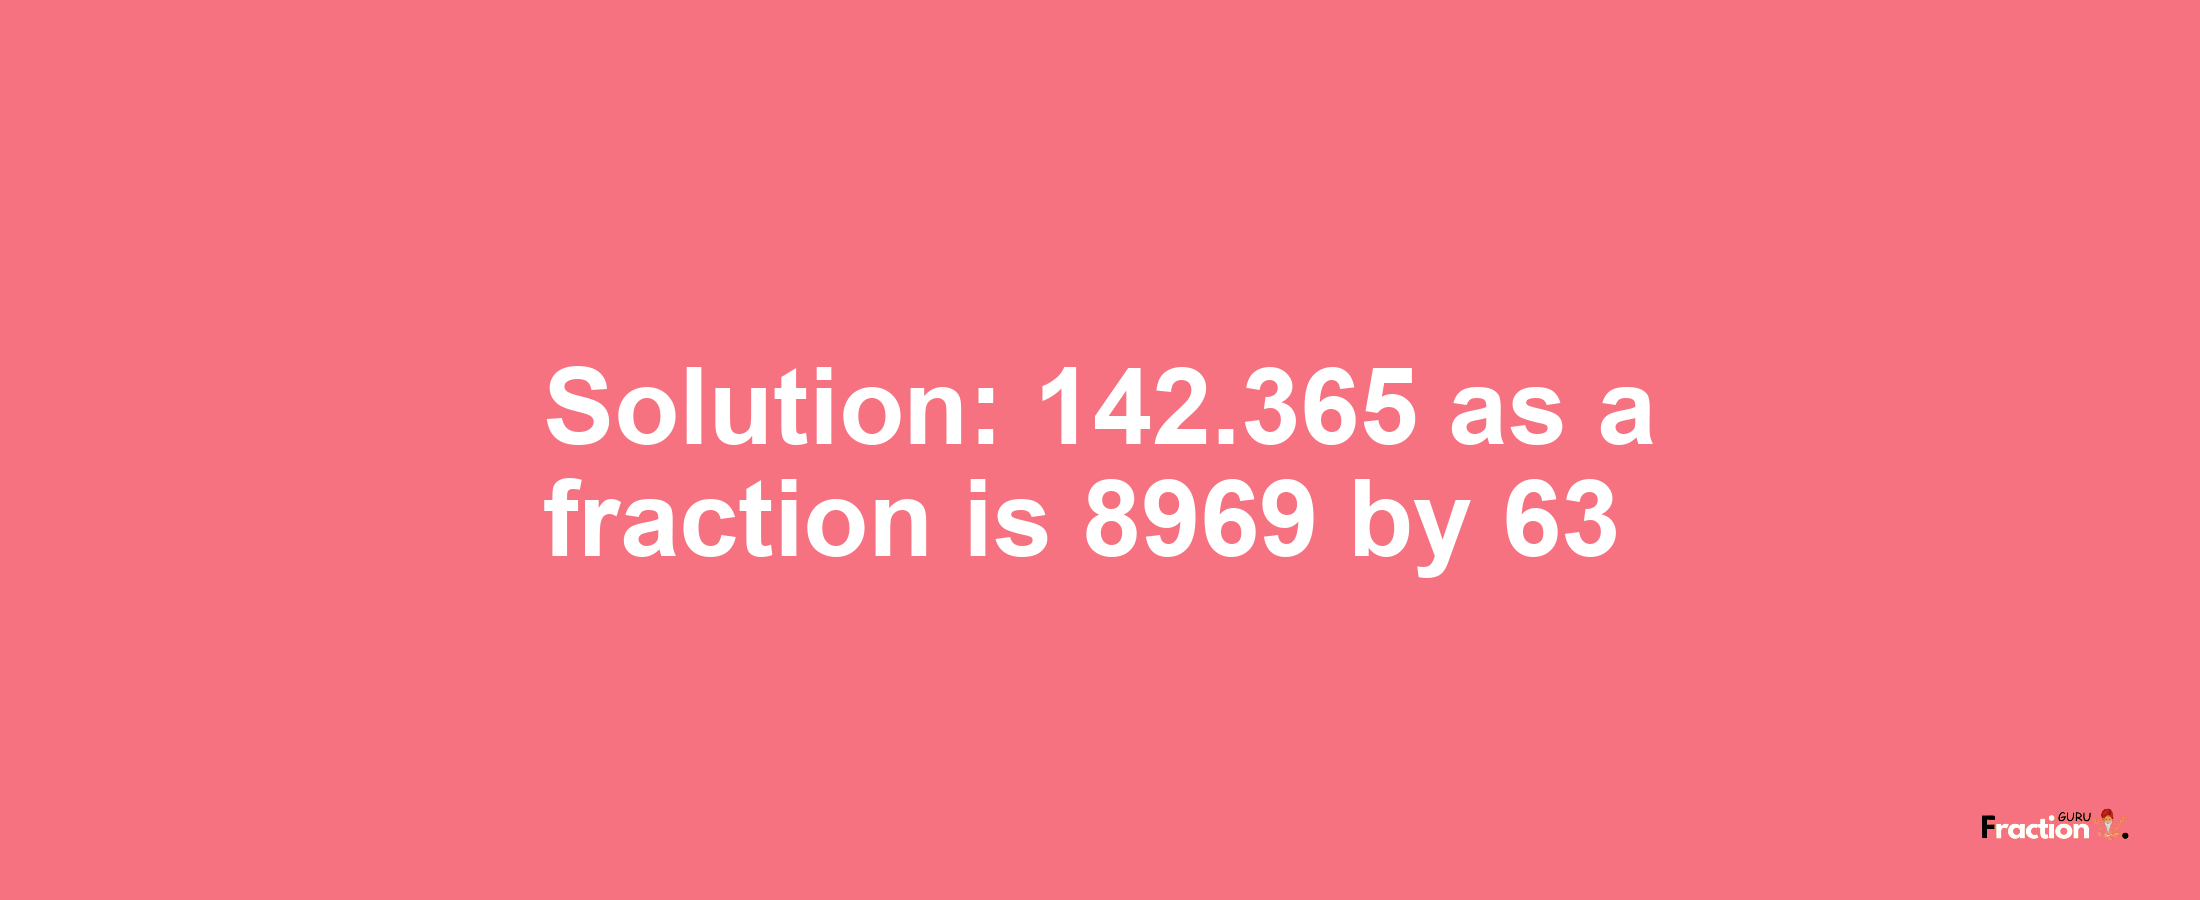 Solution:142.365 as a fraction is 8969/63